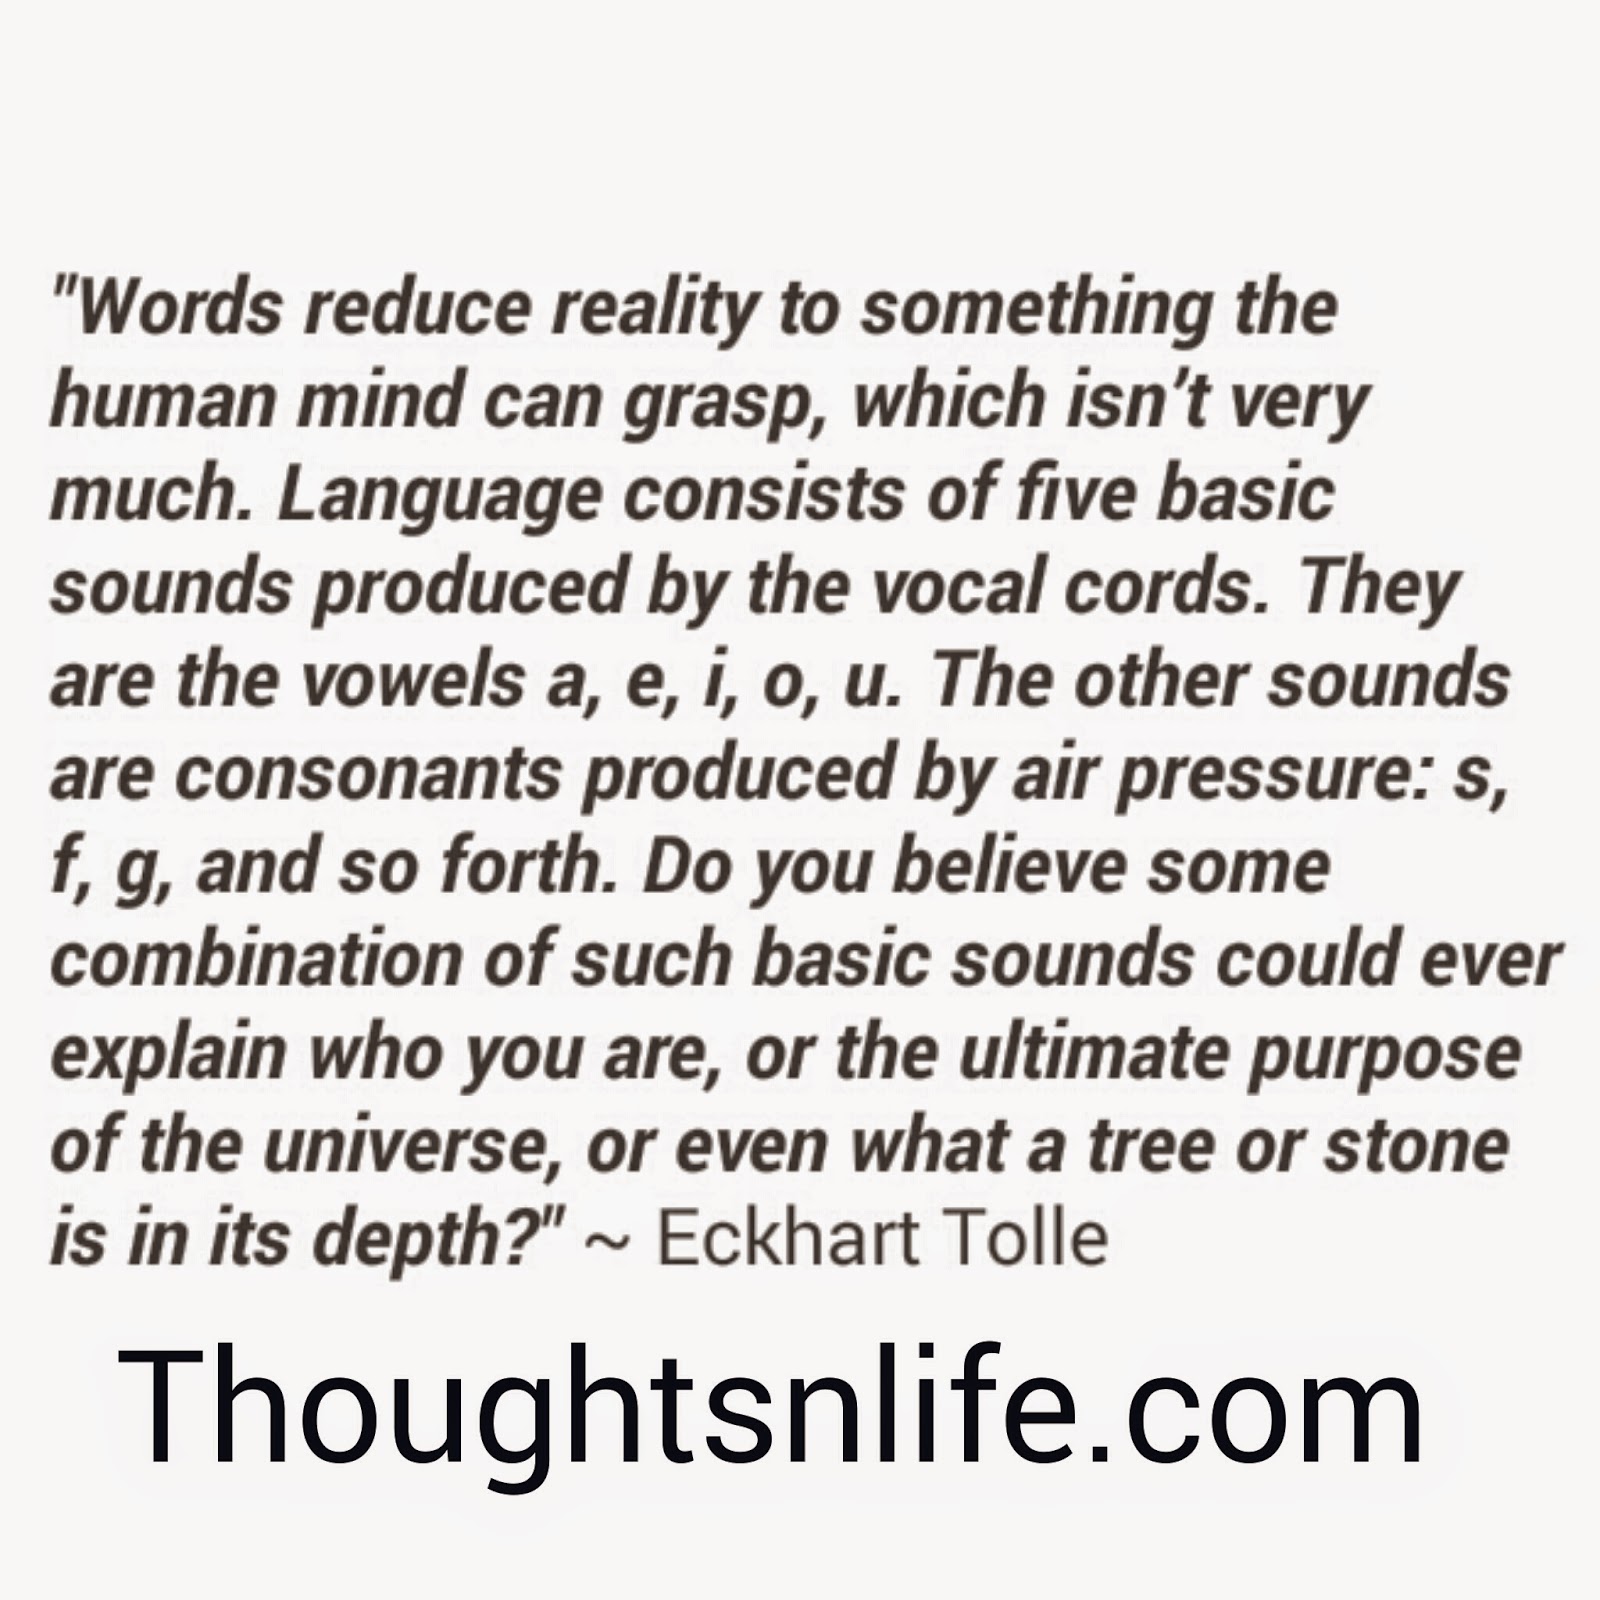  Eckhart Tolle,  Eckhart Tolle quotes, daily spiritual quotes, eckhart tolle quotes a new earth